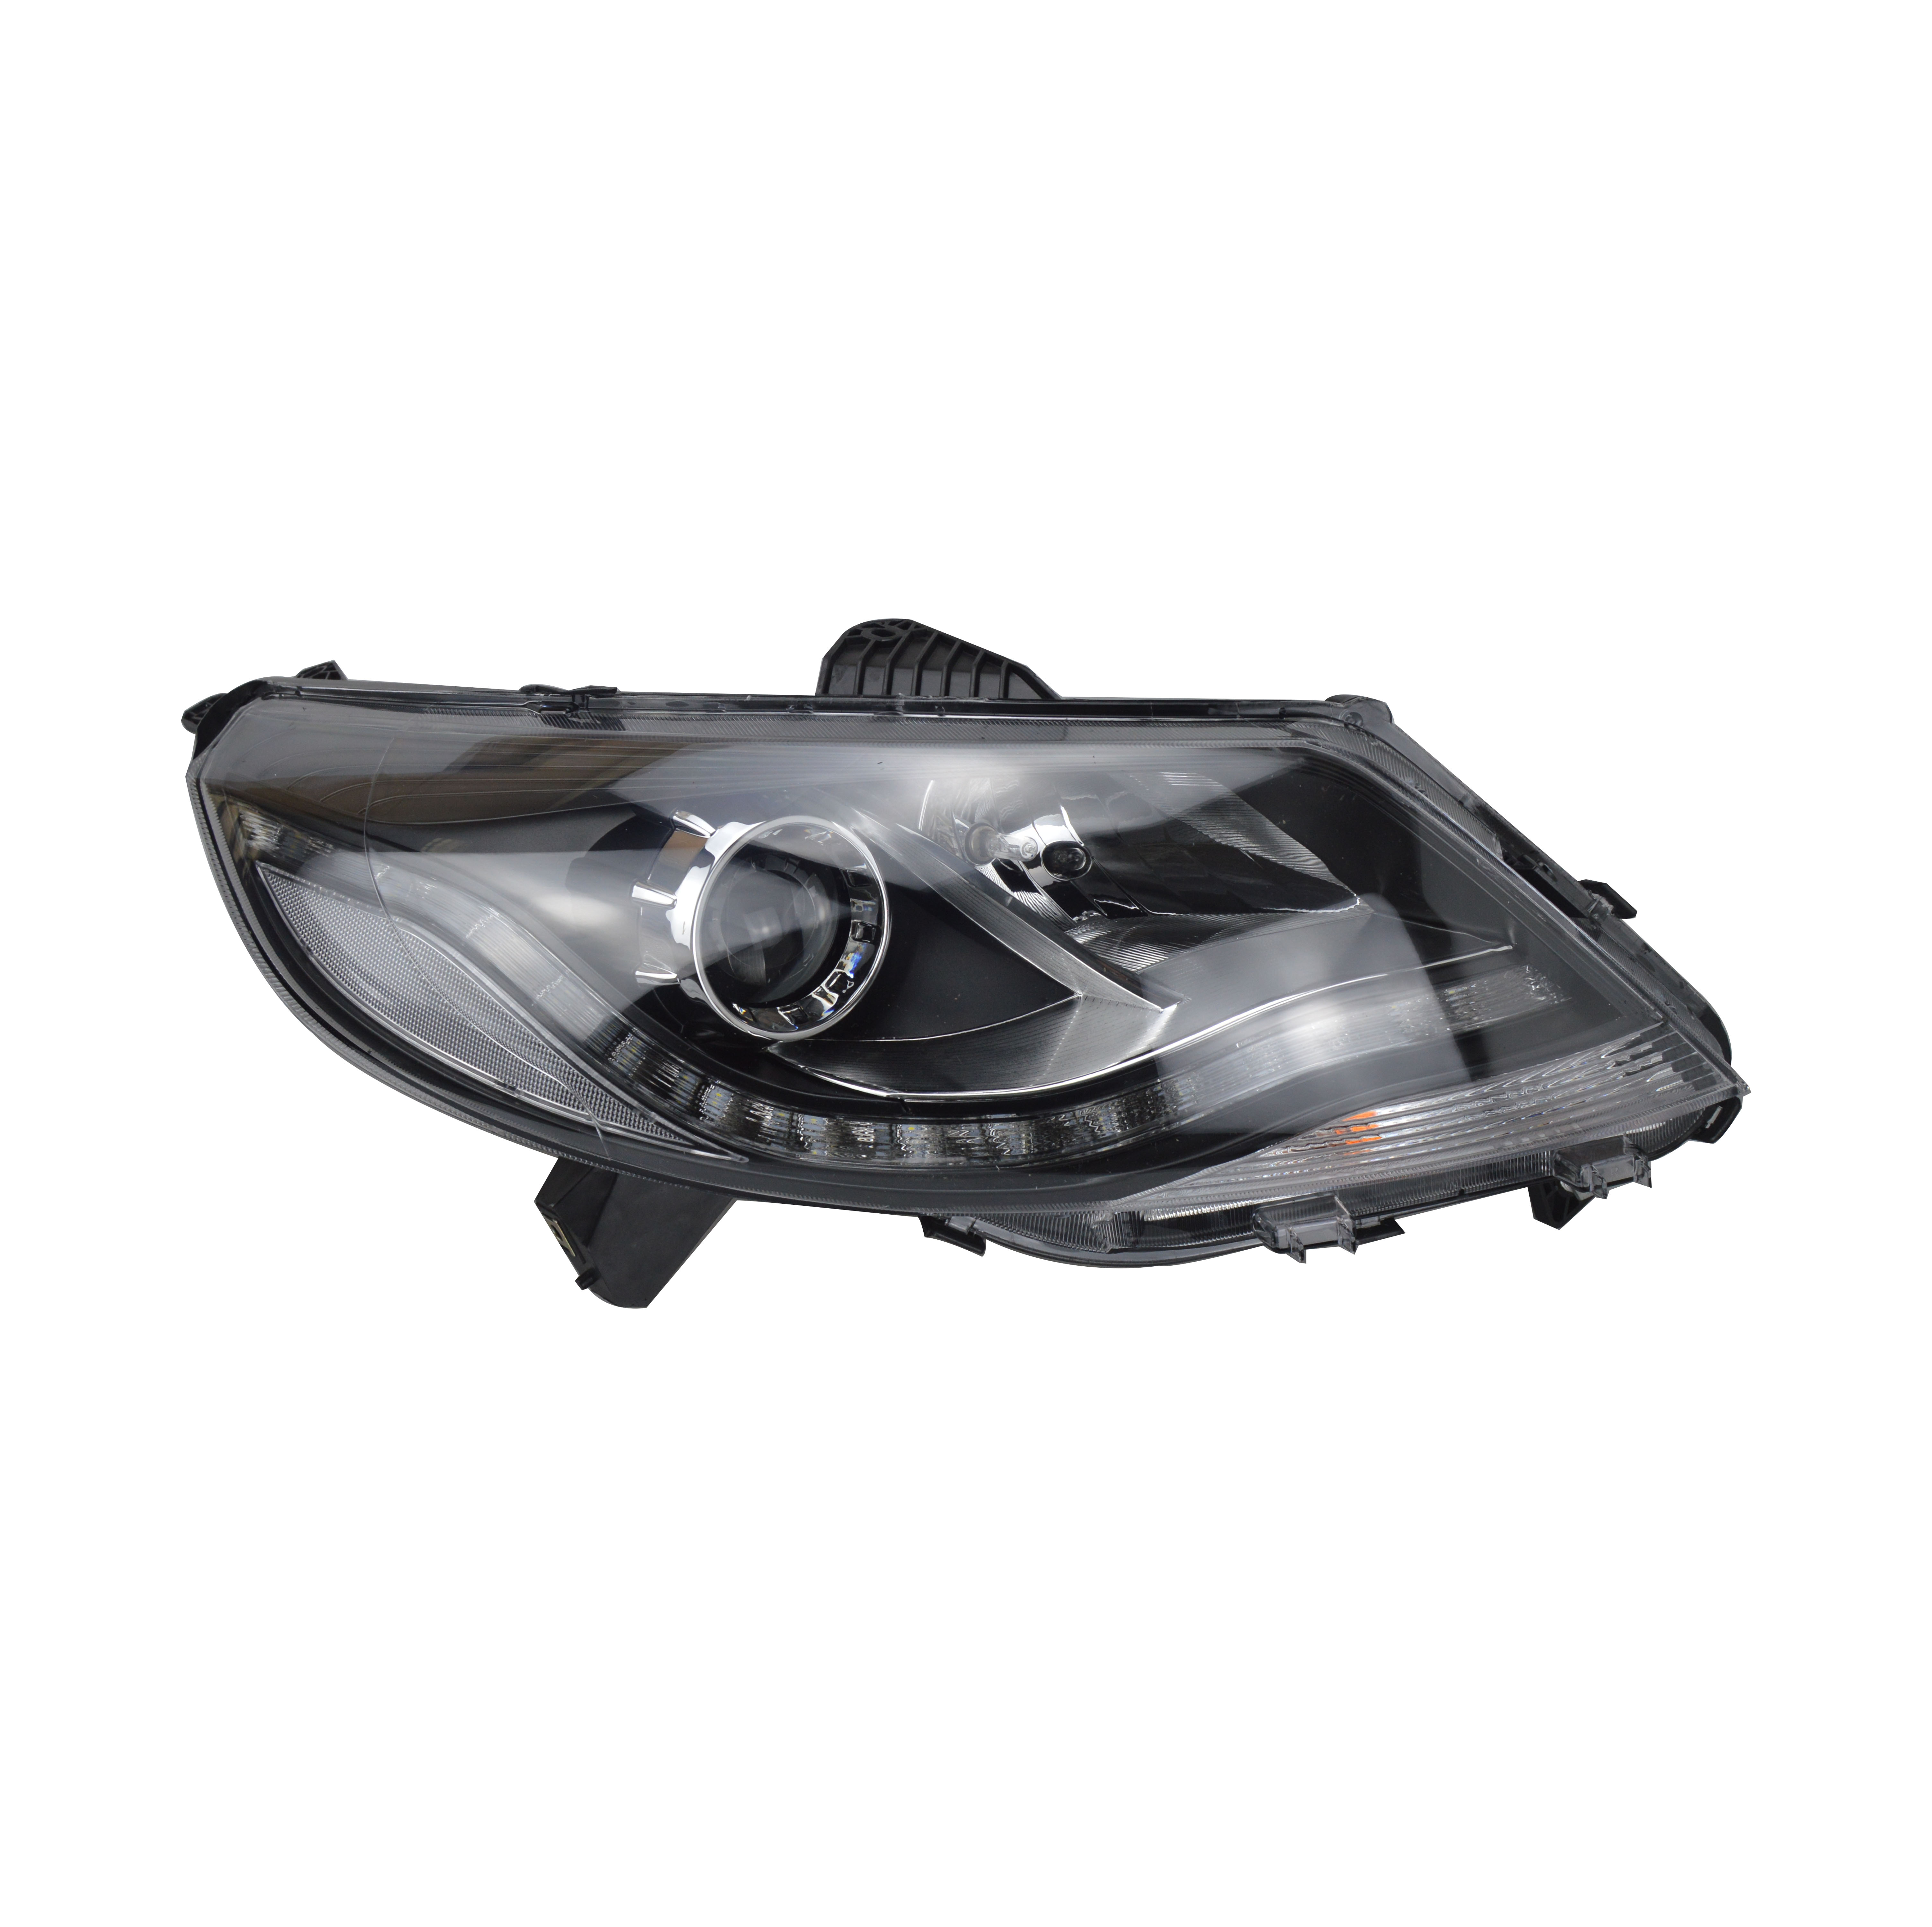 Auto Body Parts DFM DFSK Dongfeng Fengguang Glory 580 Front Lamp Luxury Configuration Headlight 